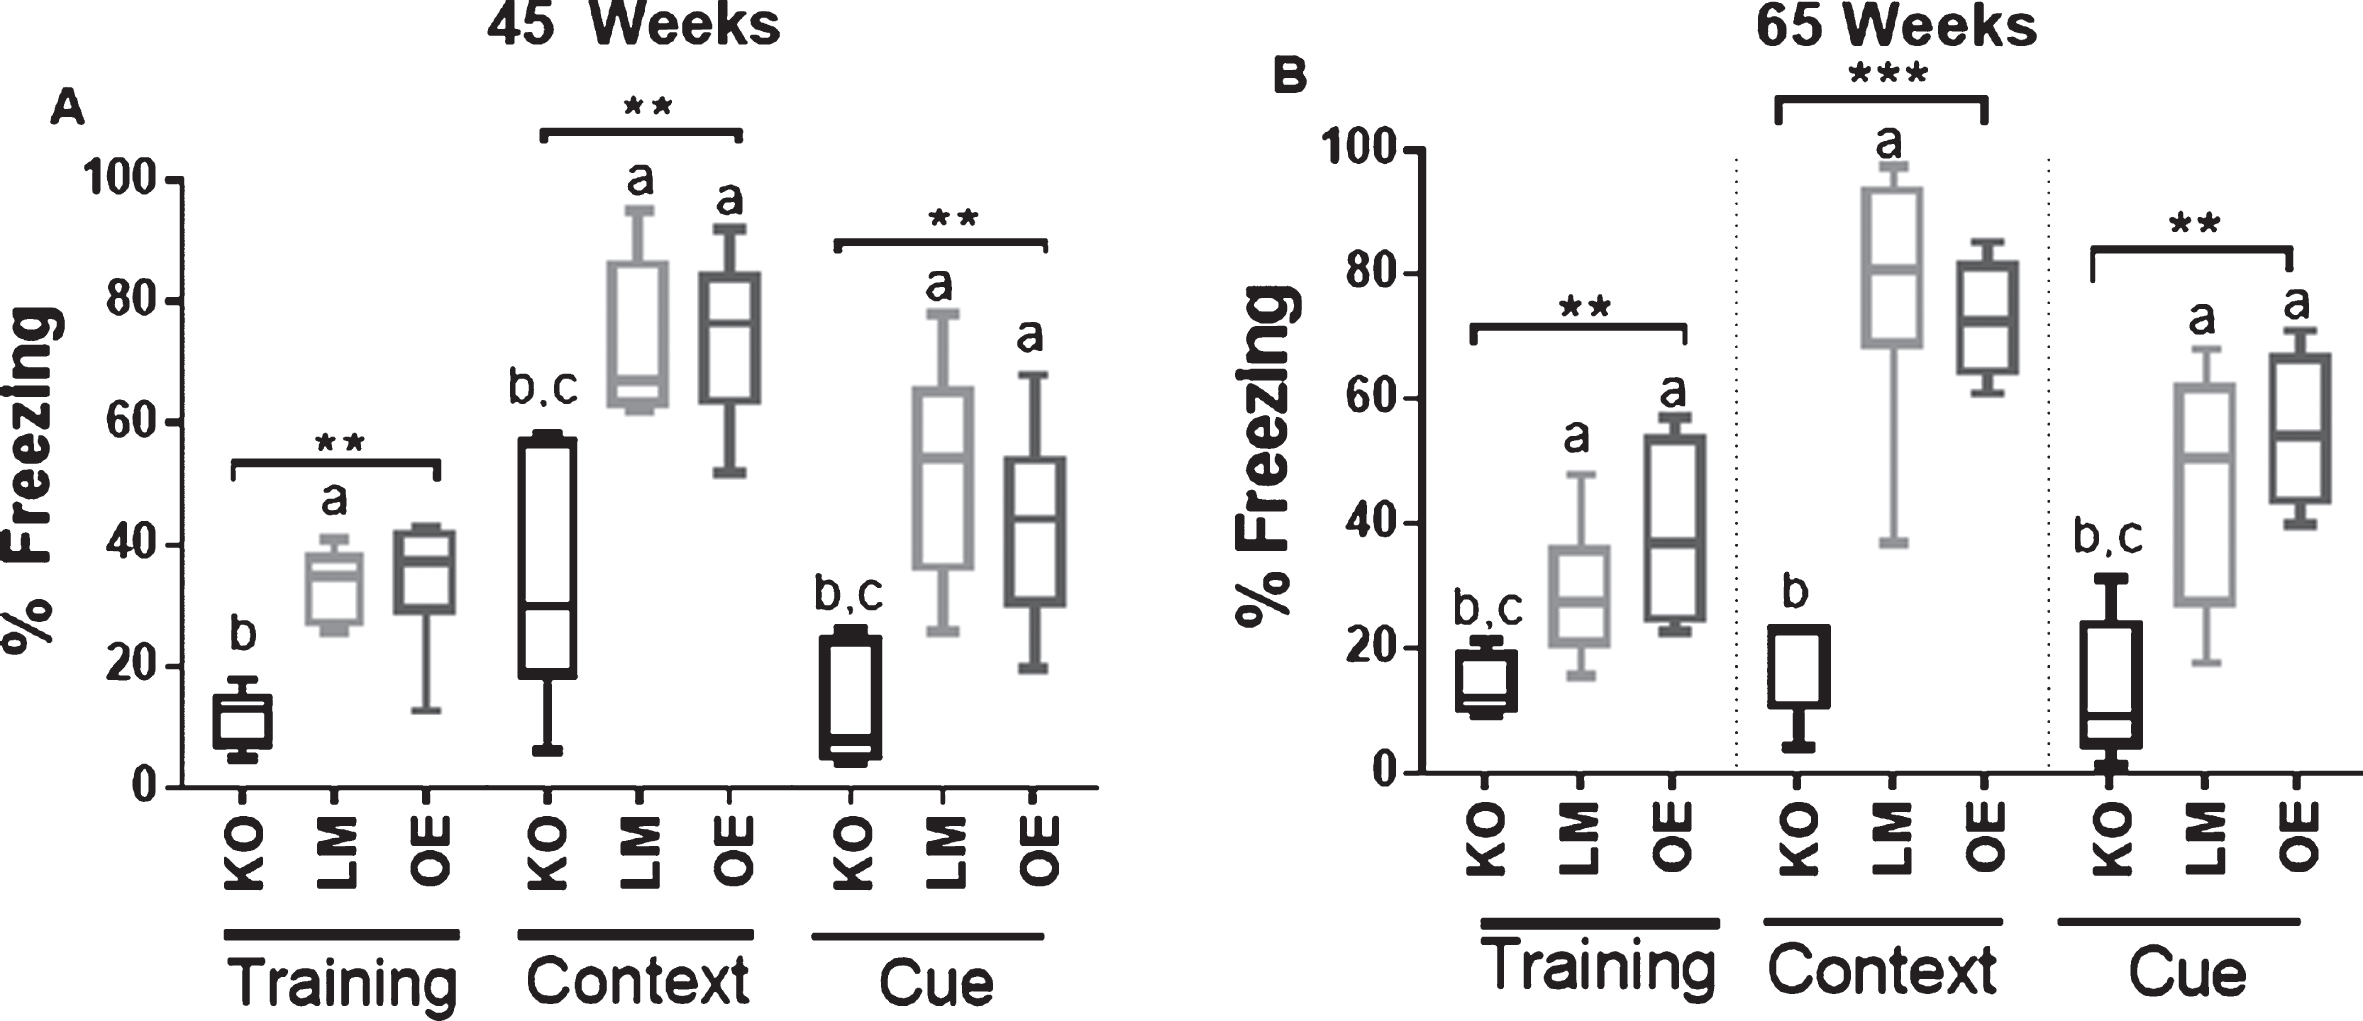 Fear conditioning responses in male mice. Data are presented as the percentage of freezing time during testing. Fear conditioning responses in (A) 45-week-old and (B) 65-week-old mice. n = 5-8 mice (A) and 4-10 mice (B) per experimental group. KO = brain-specific SIRT1 knock-out, OE = brain-specific SIRT1 overexpression, LM = littermate controls. **p<0.01, ***p<0.001. Error bars represent the mean±SEM. Different letters (a,b,c) indicate statistically significant differences as determined from the Dunn’s post-hoc test corrected for multiple comparisons. a = group is significantly different to KO; b = group is significantly different to LM; c = group is significantly different to OE.